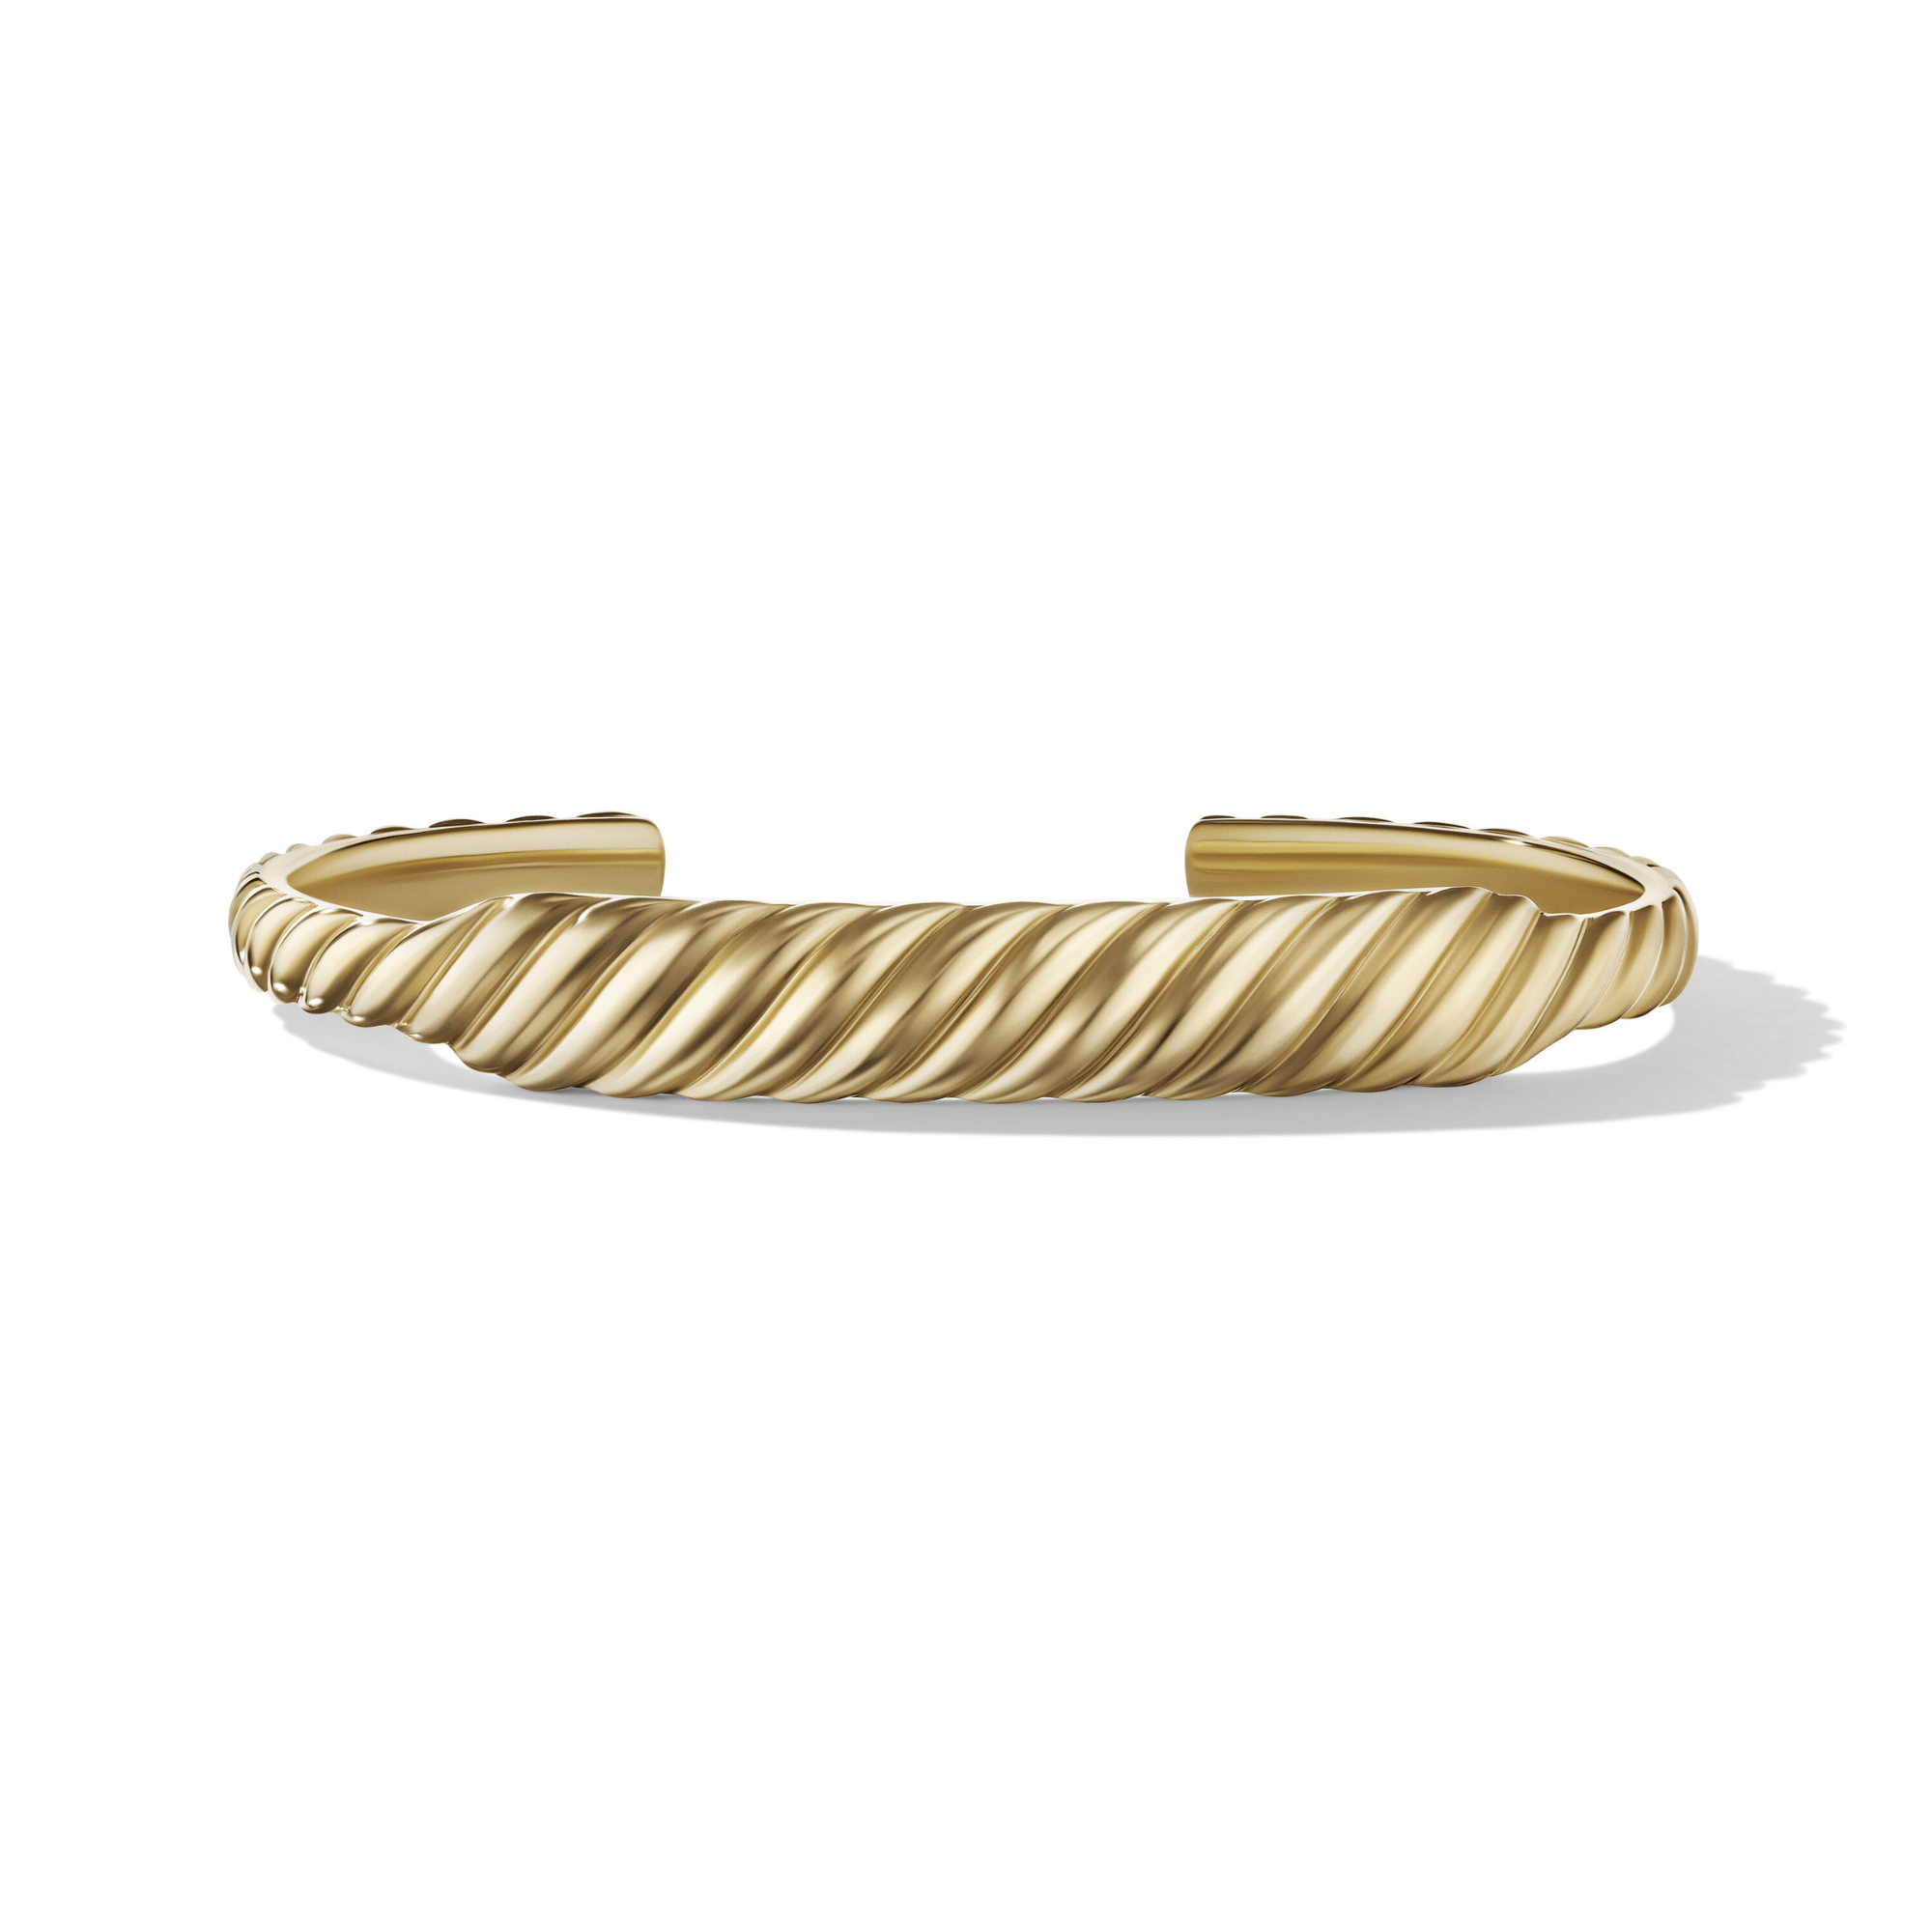 Sculpted Cable Contour Cuff Bracelet in 18ct Yellow Gold